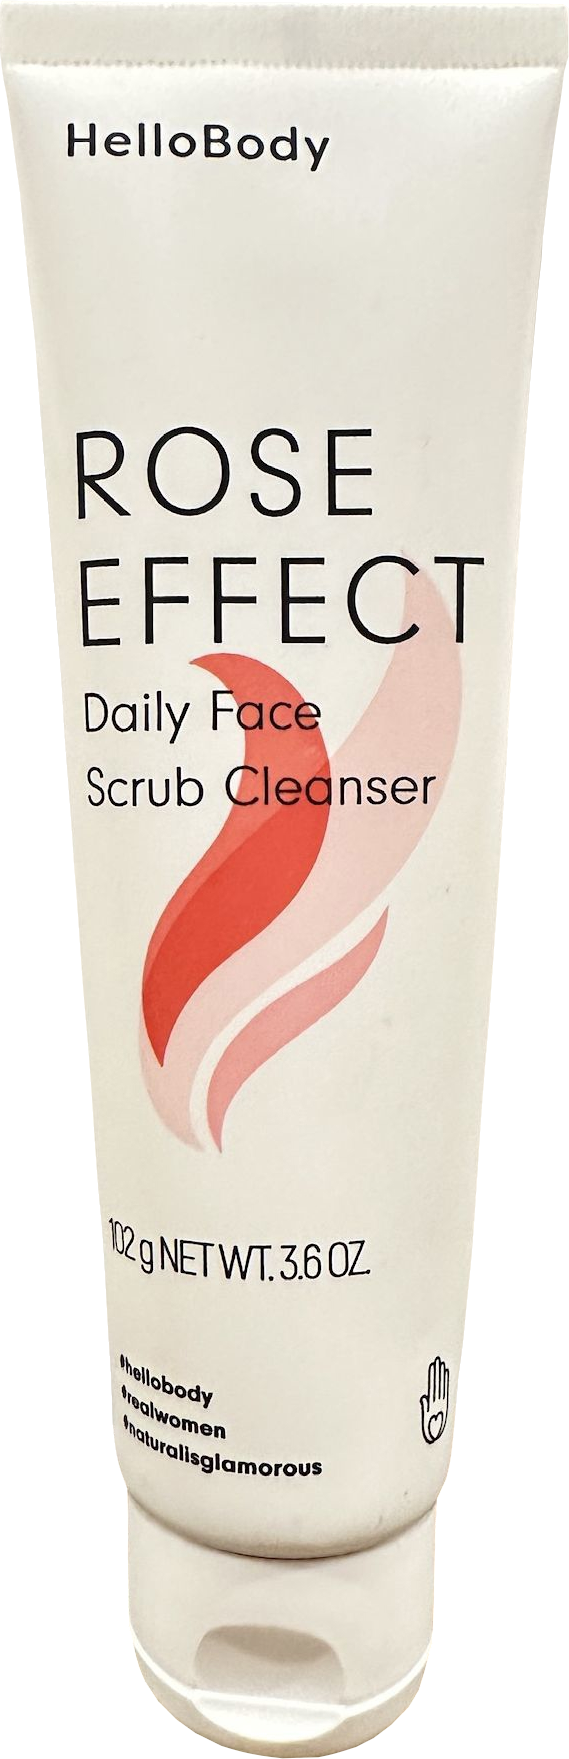 hellobody Rose Effect Daily Face Scrub Cleanser 102g